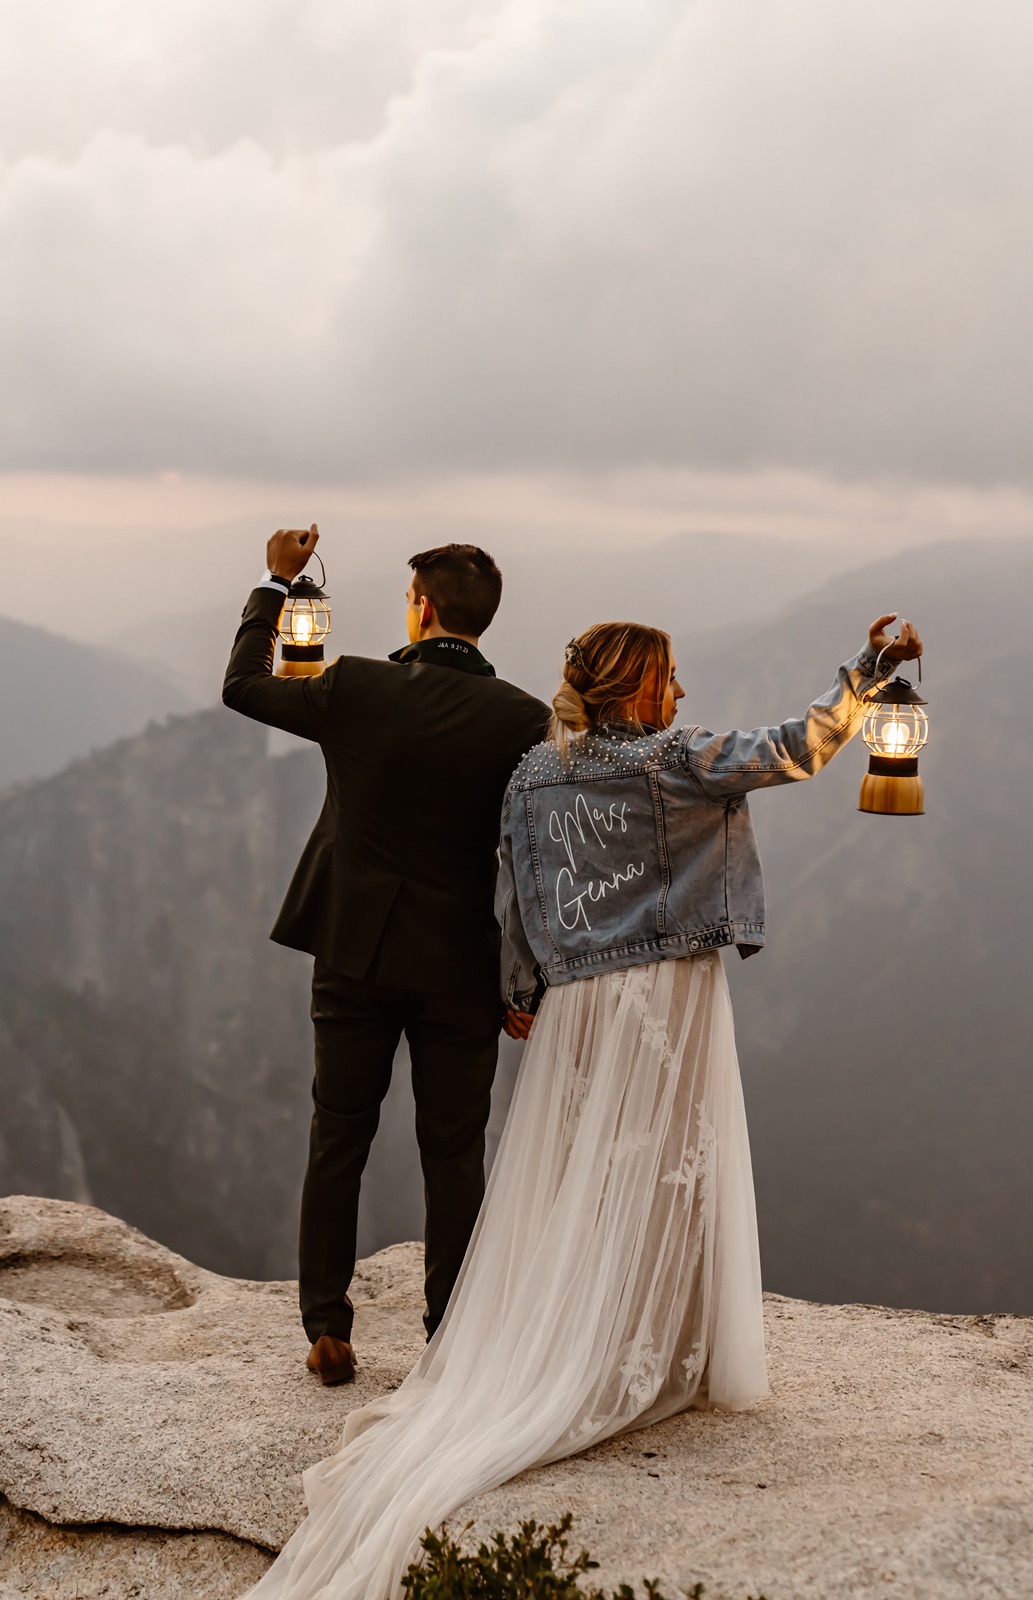 Bride and groom hold lanterns during Taft Point elopement photos